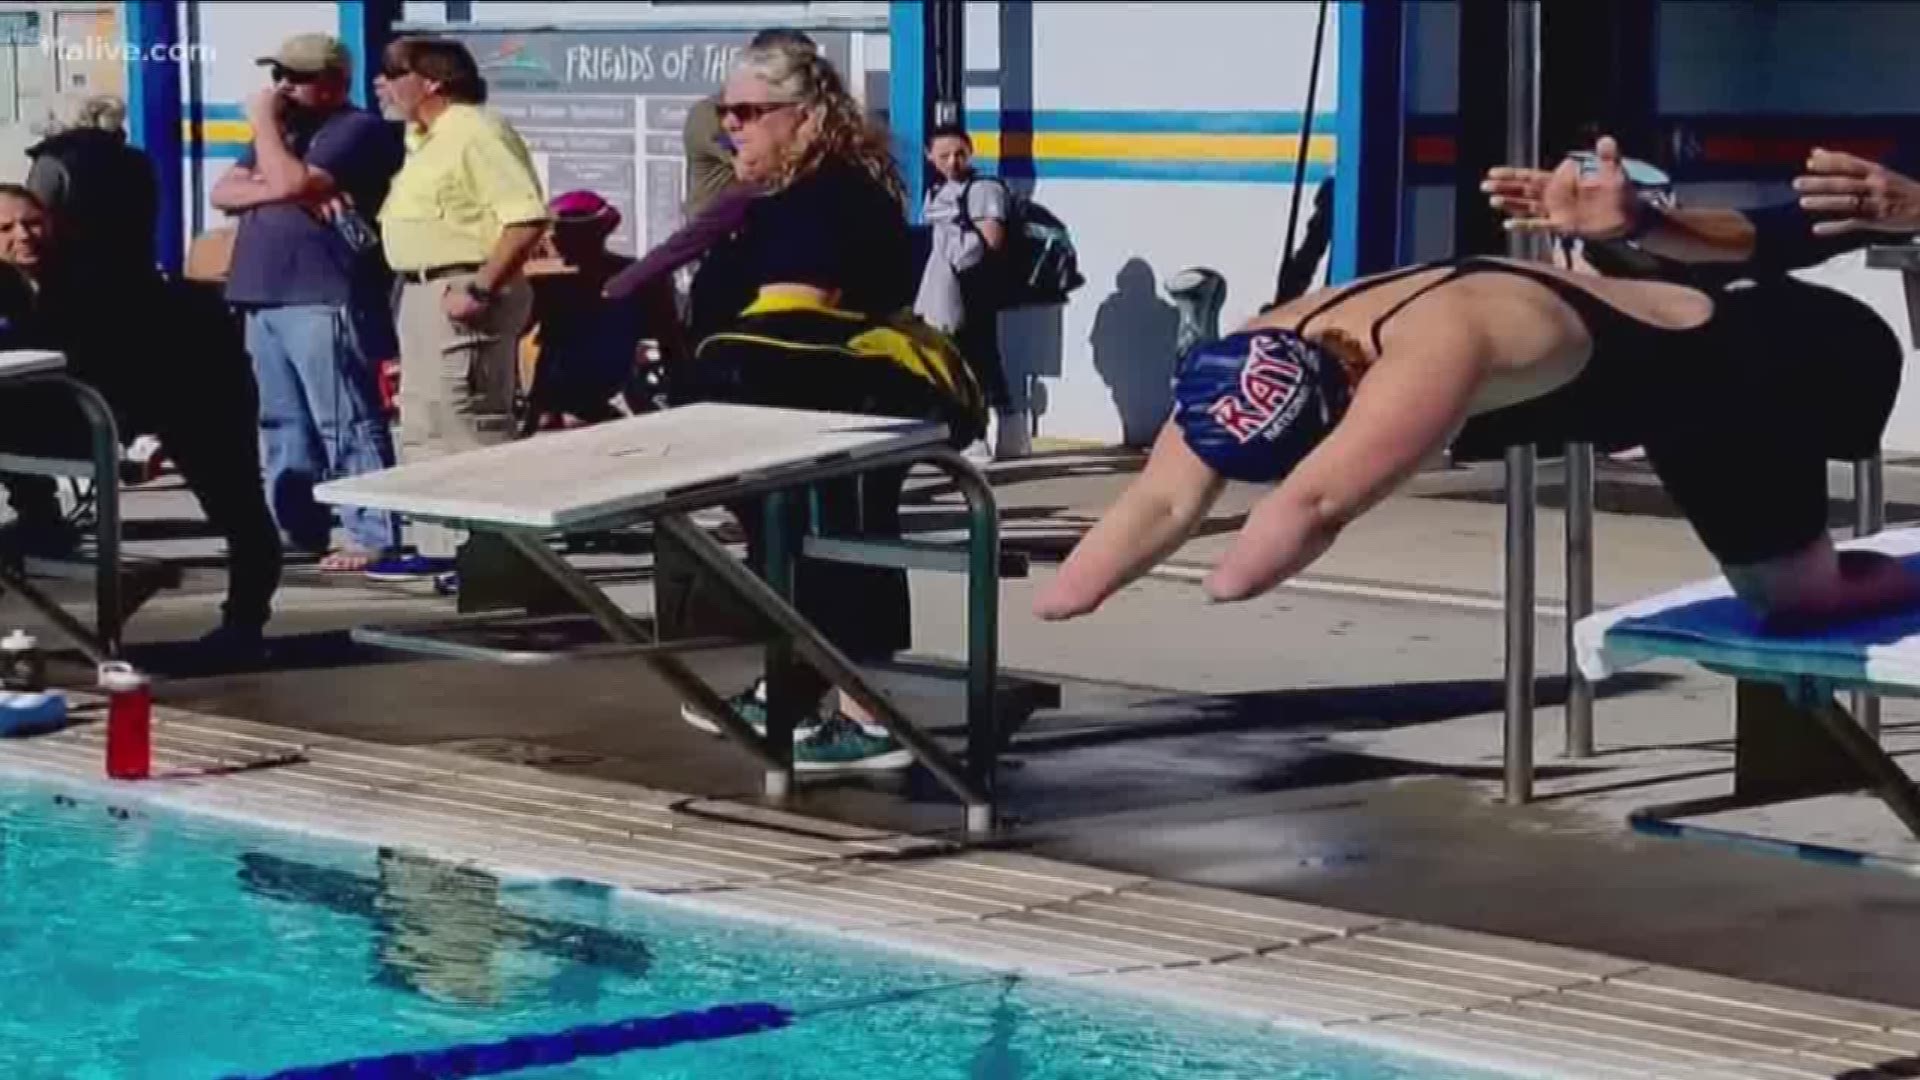 After a zip-lining incident gone wrong, one young woman found her strength. Now, she's entering the world of competitive swimming. This is your latest "Whatever happened to..."